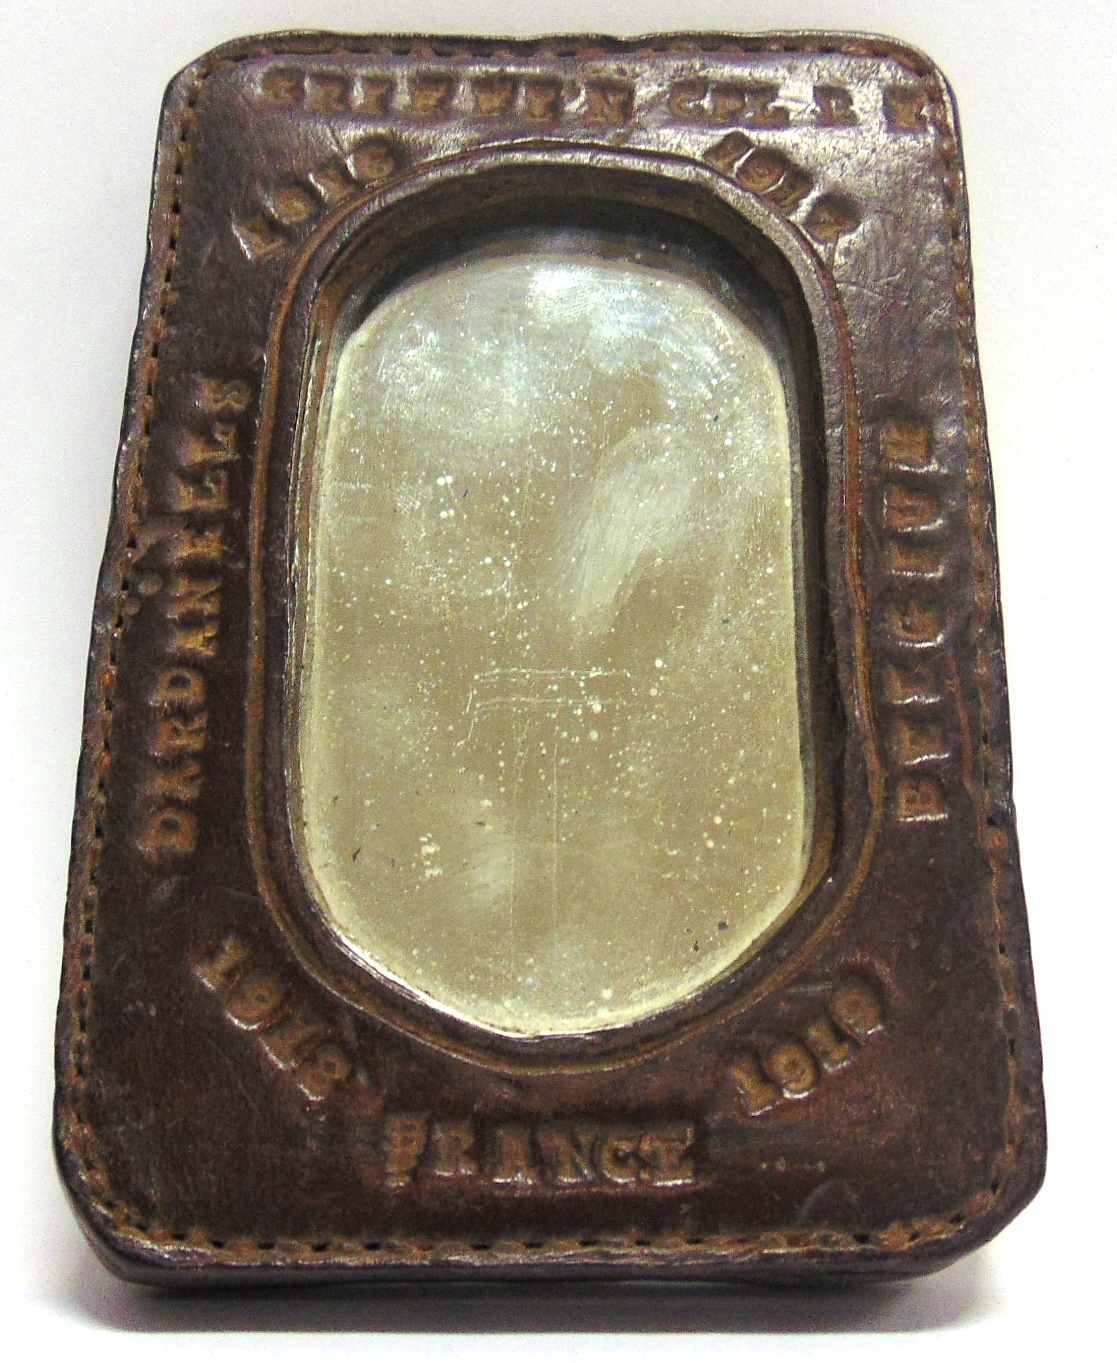 GREAT WAR - A PERSONALISED HANDMADE LEATHER FRAMED SHAVING MIRROR probably made by a harness - Image 3 of 4